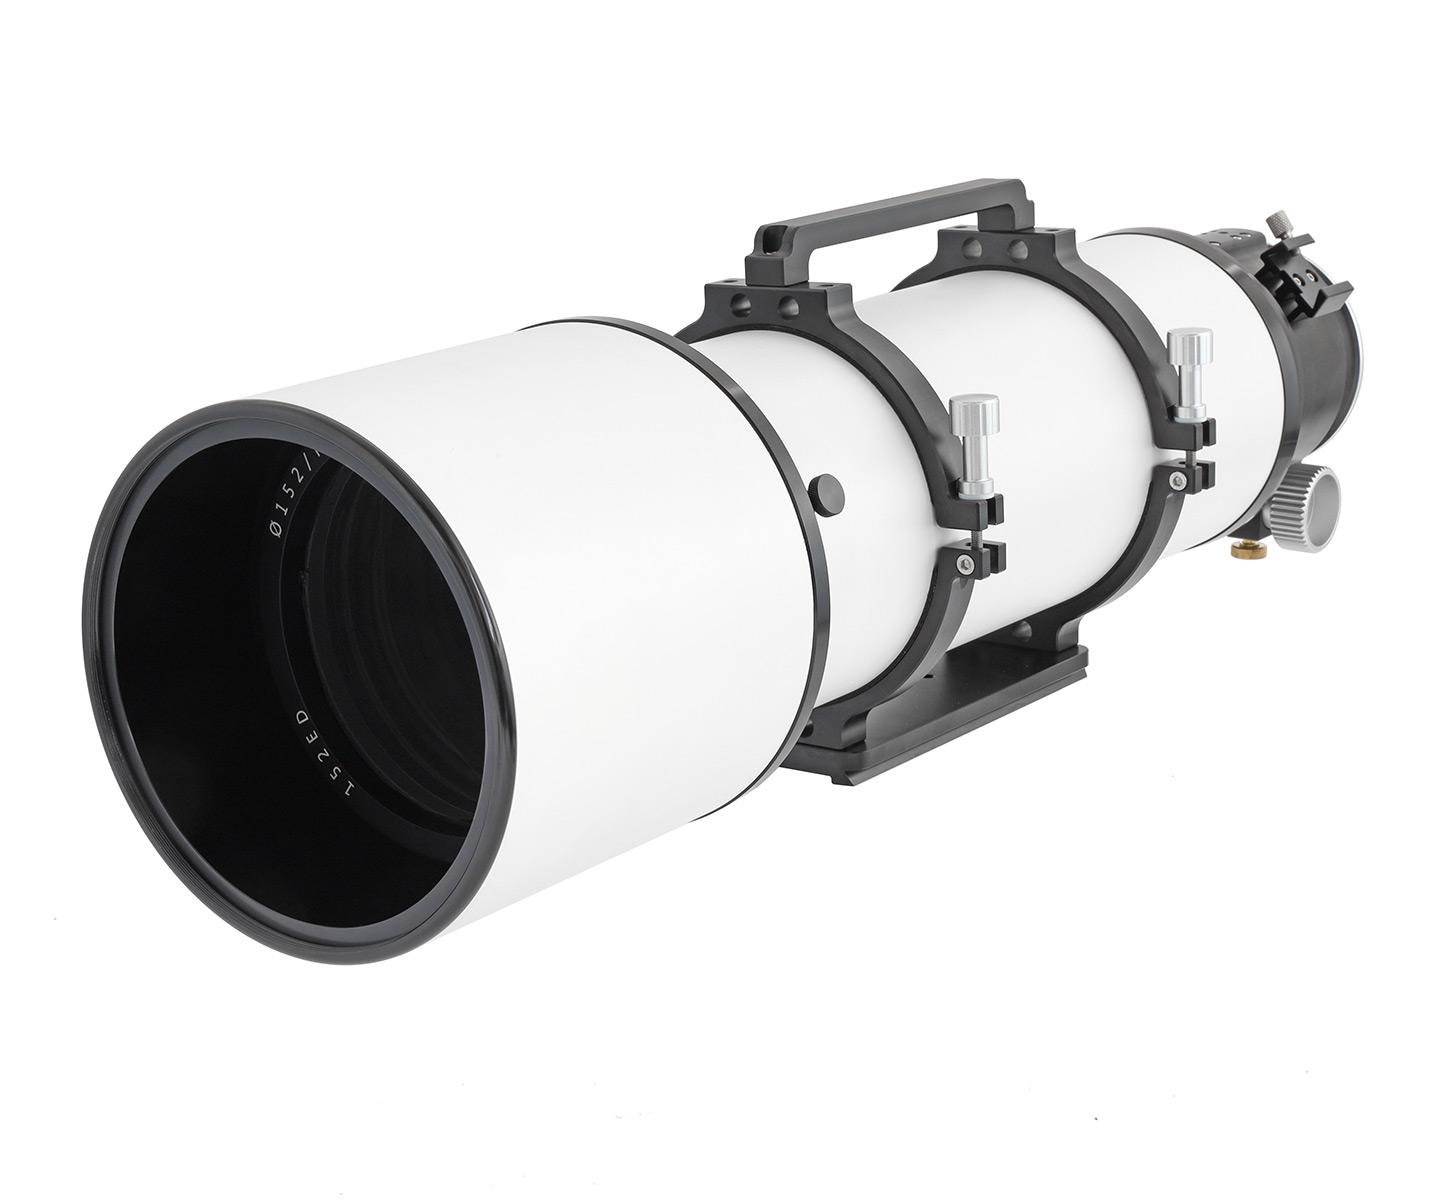  TS PHOTOLINE 140 mm f/6.5 Triplet Apochromat for observing and astrophotography - high quality triplet lens from Japanese production [EN] 